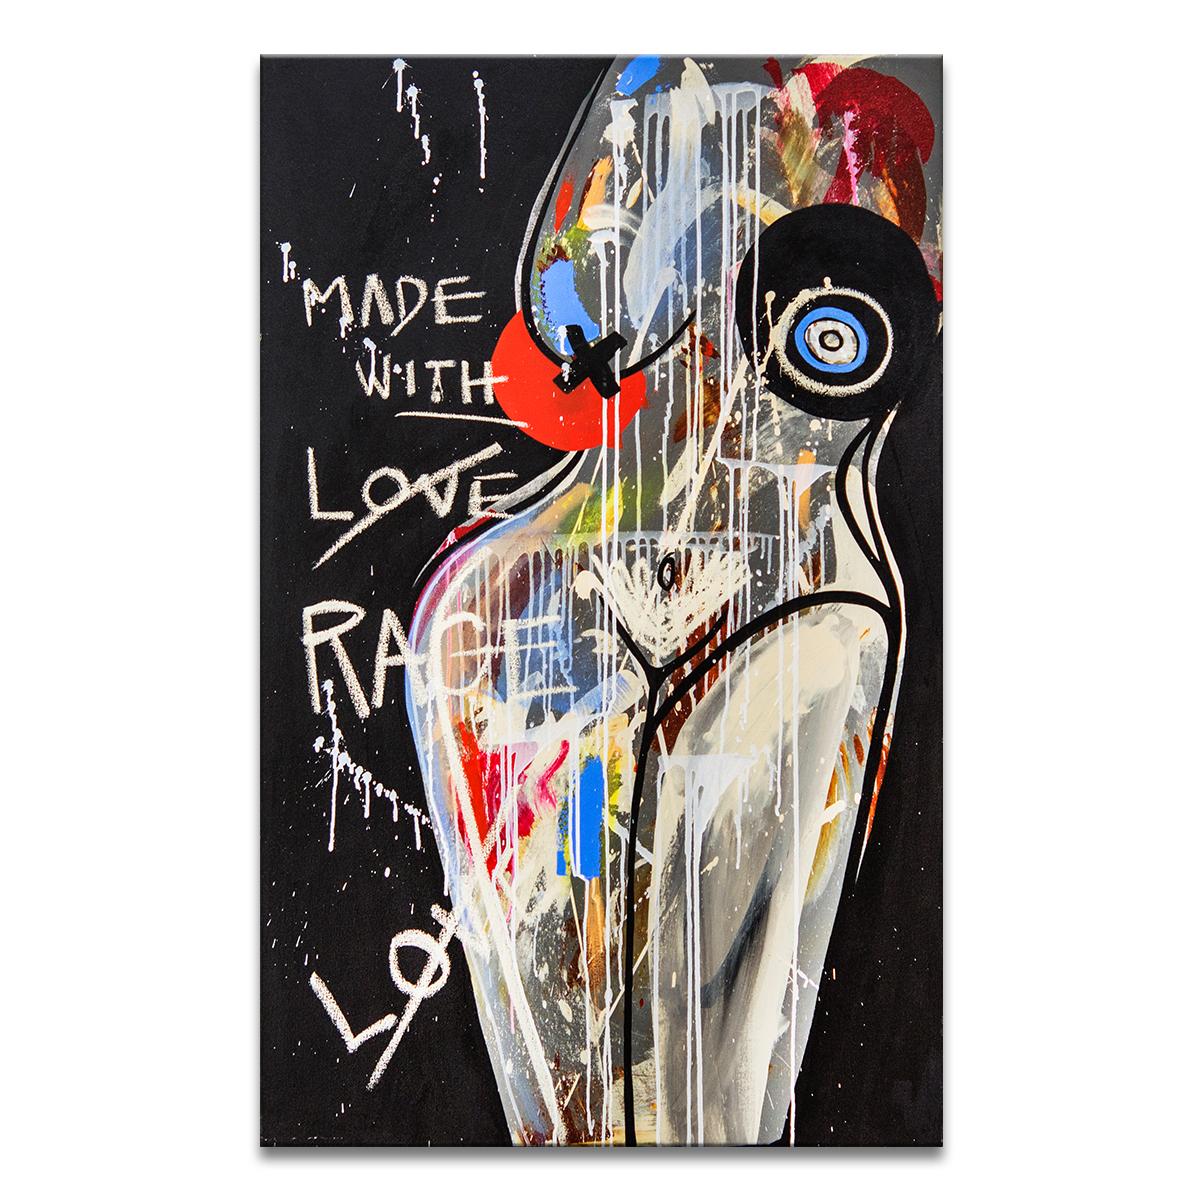 'Made with Love' Wrapped Canvas Original Painting features an abstract female figure adorned by the text "made with love rage" in vivid tones of blue, red, beige, yellow, orange, brown, pink, and gray. Exuding empowerment, Alejandra Linares’s